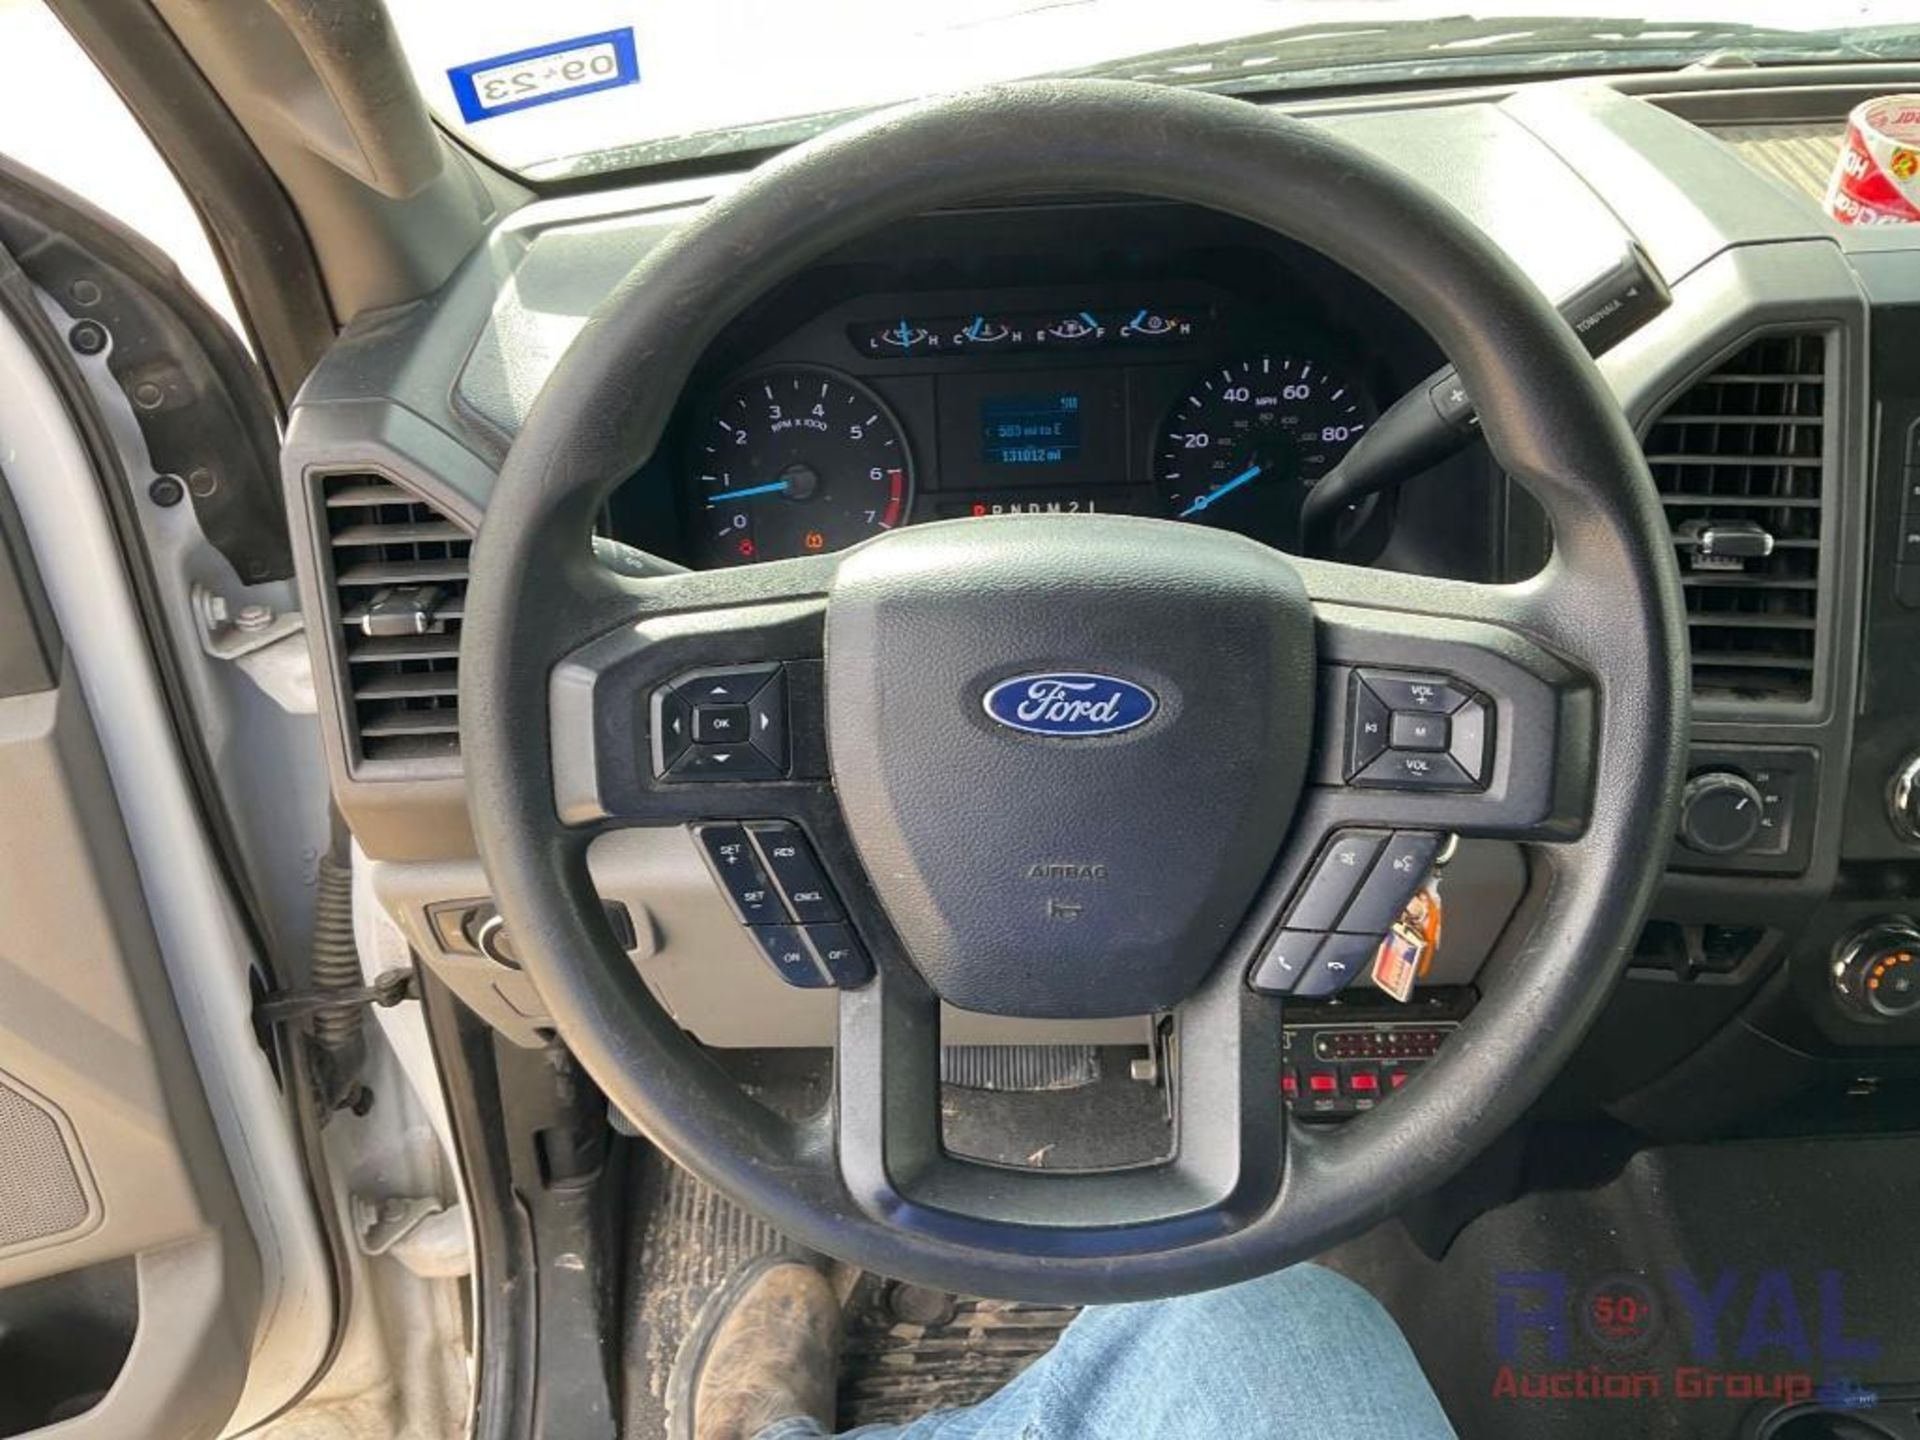 2019 Ford F250 4x4 Crew Cab Pickup Truck - Image 21 of 27